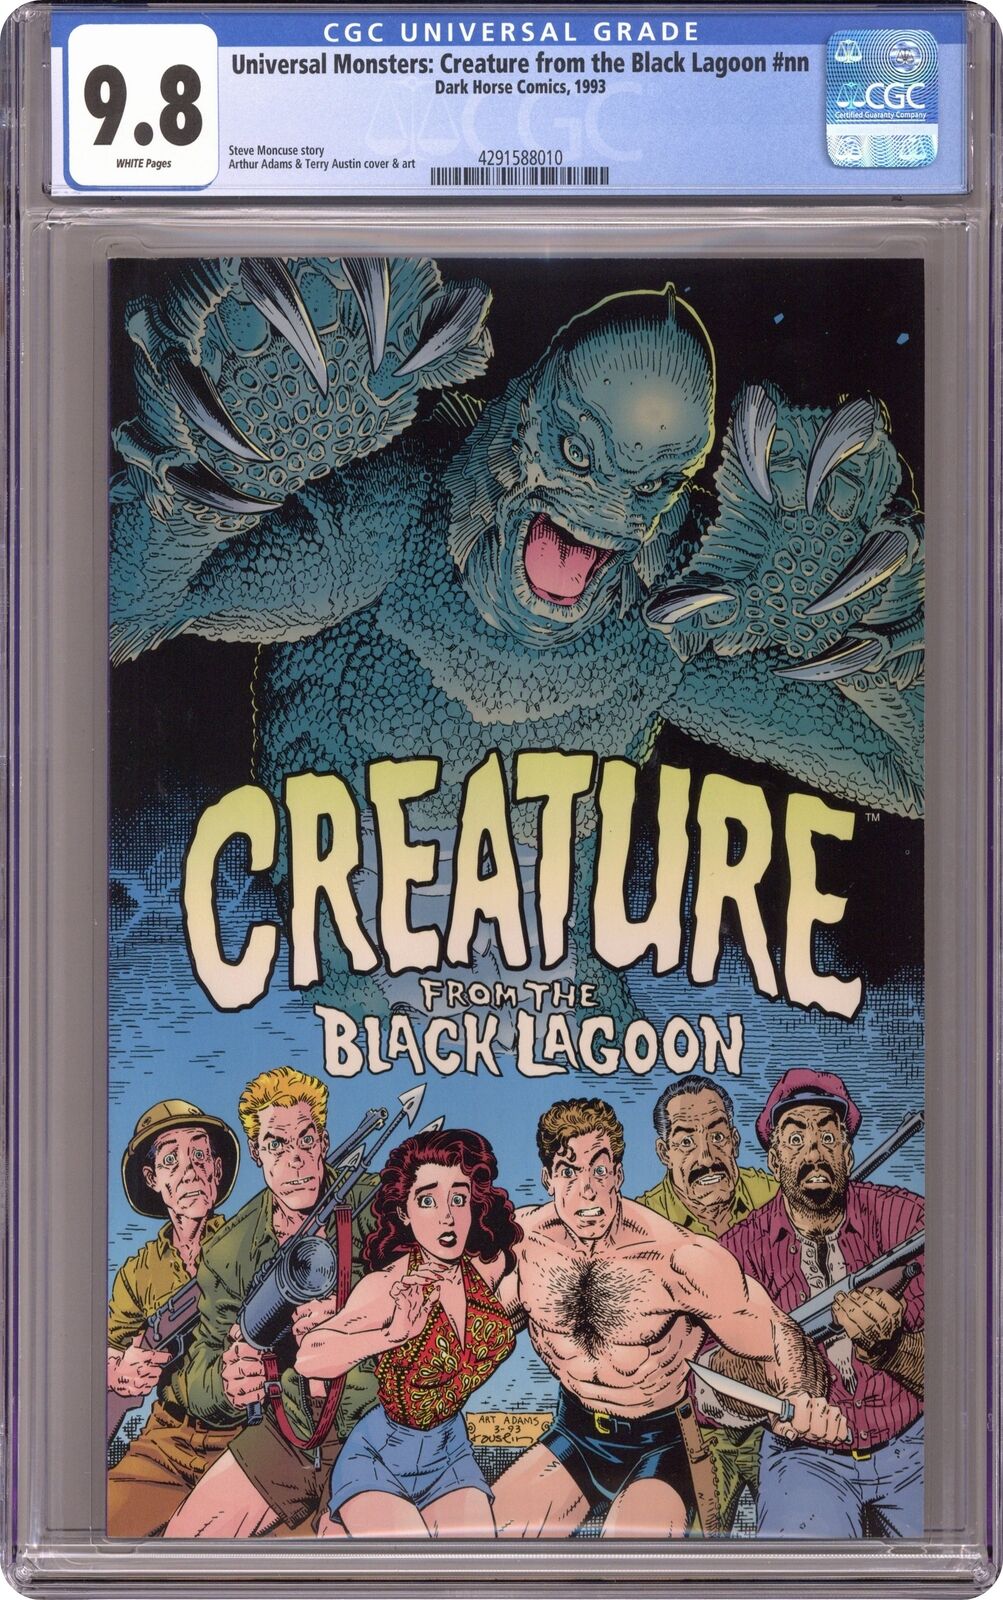 Universal Monsters Creature from the Black Lagoon #1 CGC 9.8 1993 4291588010